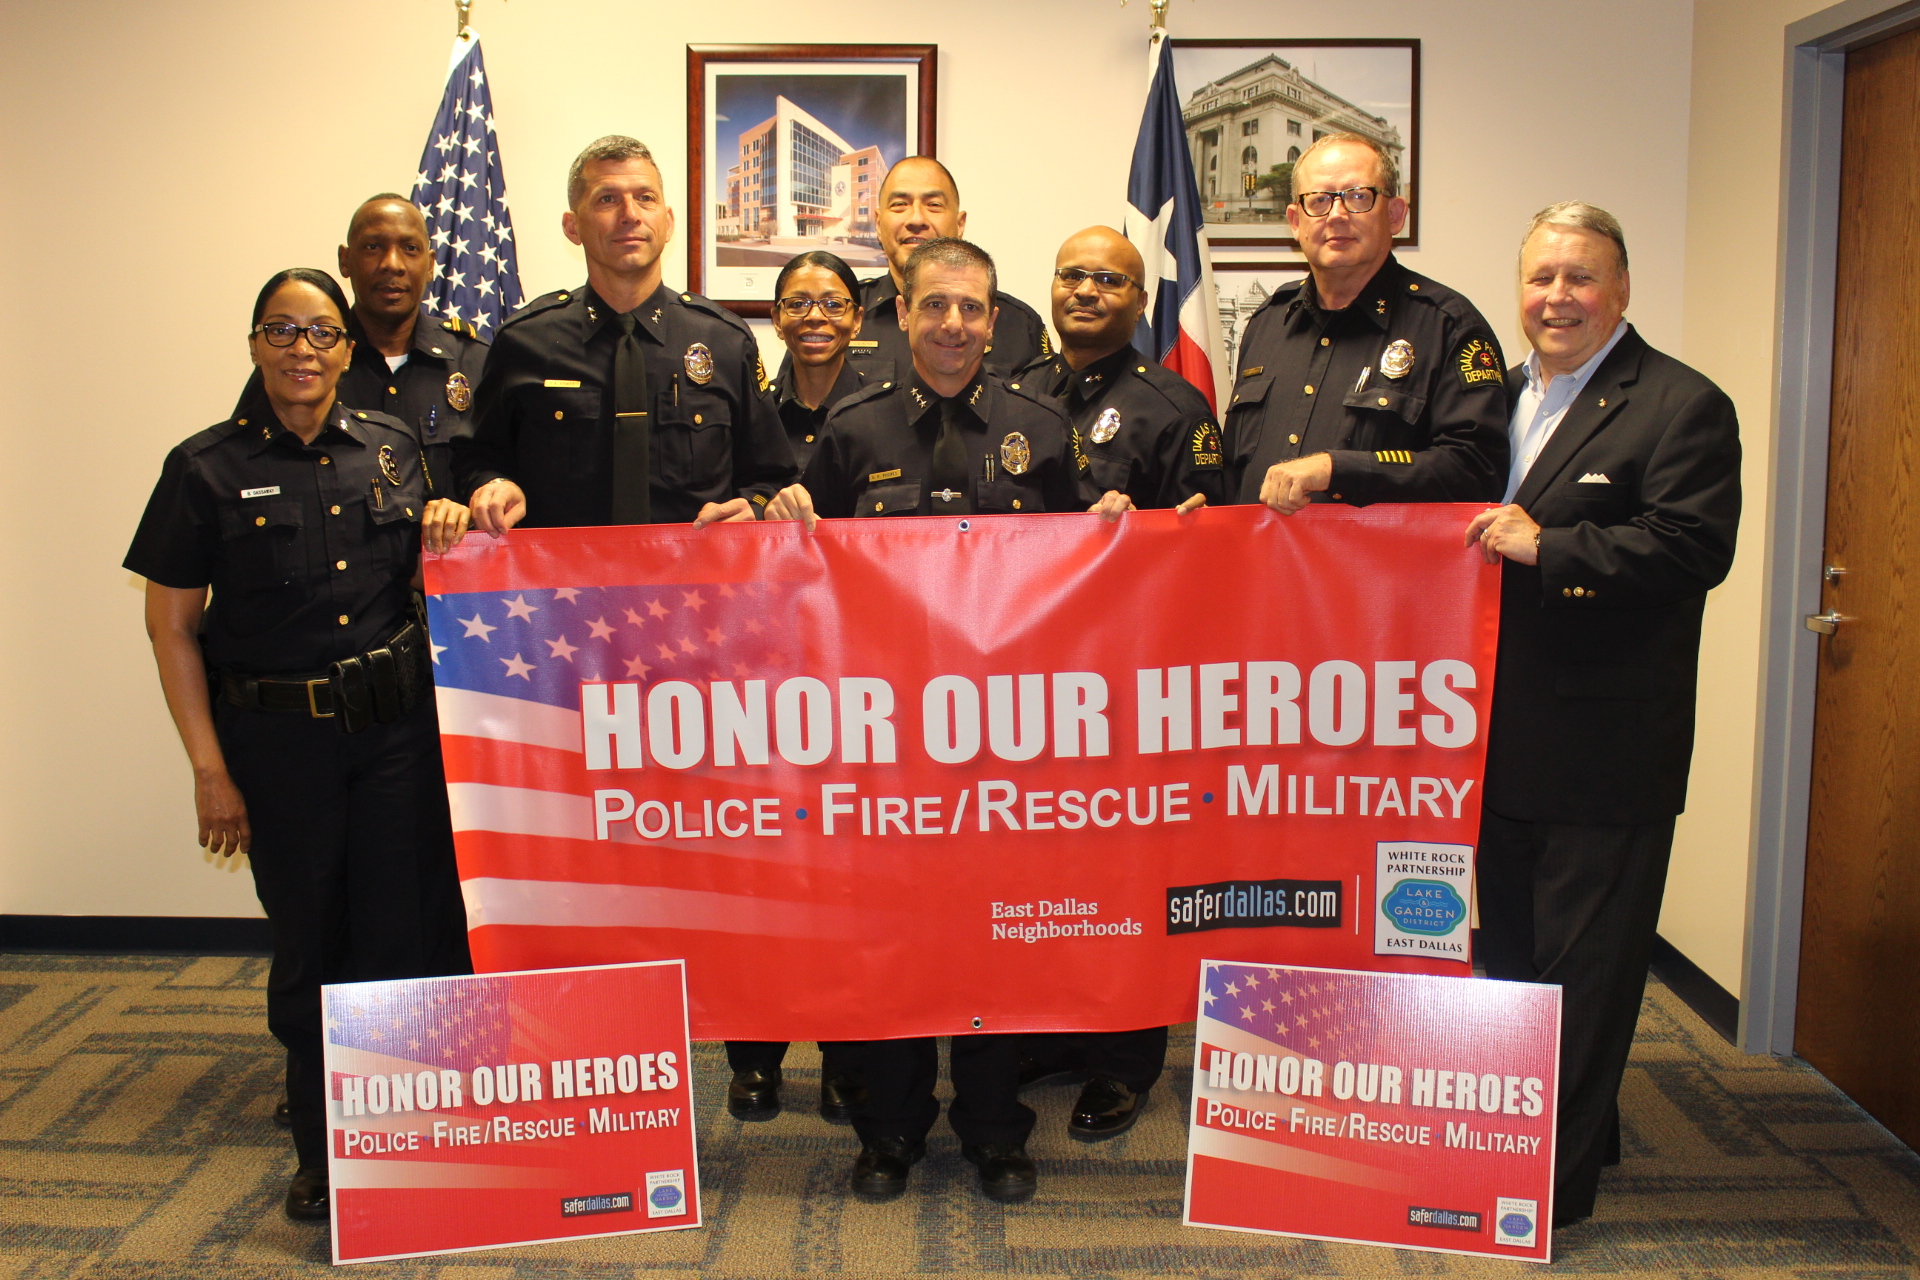 David Pittman of White Rock Partnership presented DPD with this banner on Tuesday.